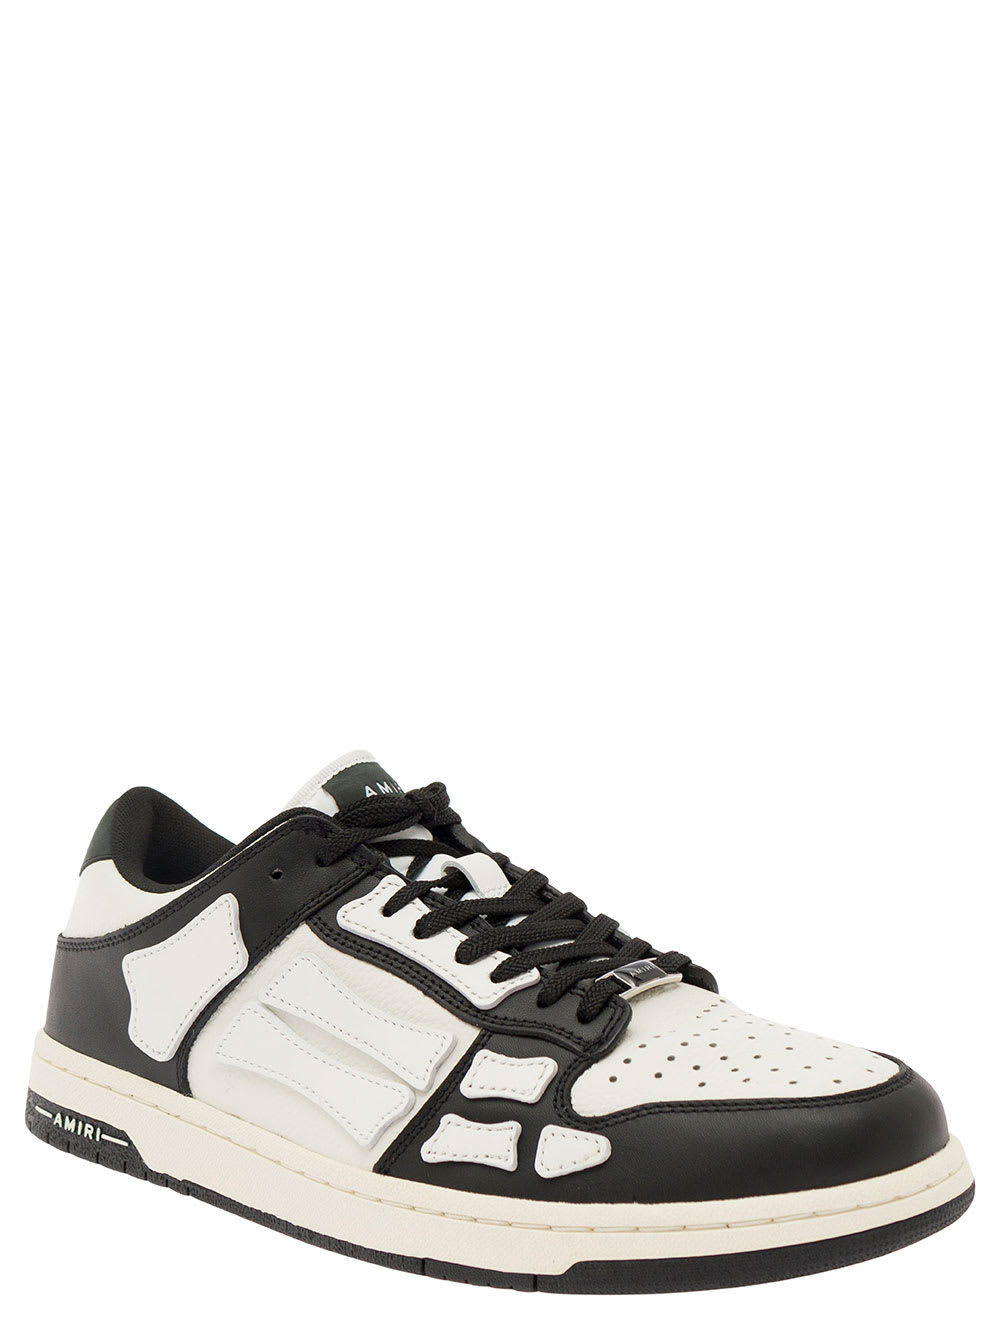 Shop Amiri Skel Top Low White And Black Sneakers With Skeleton Patch In Leather Man